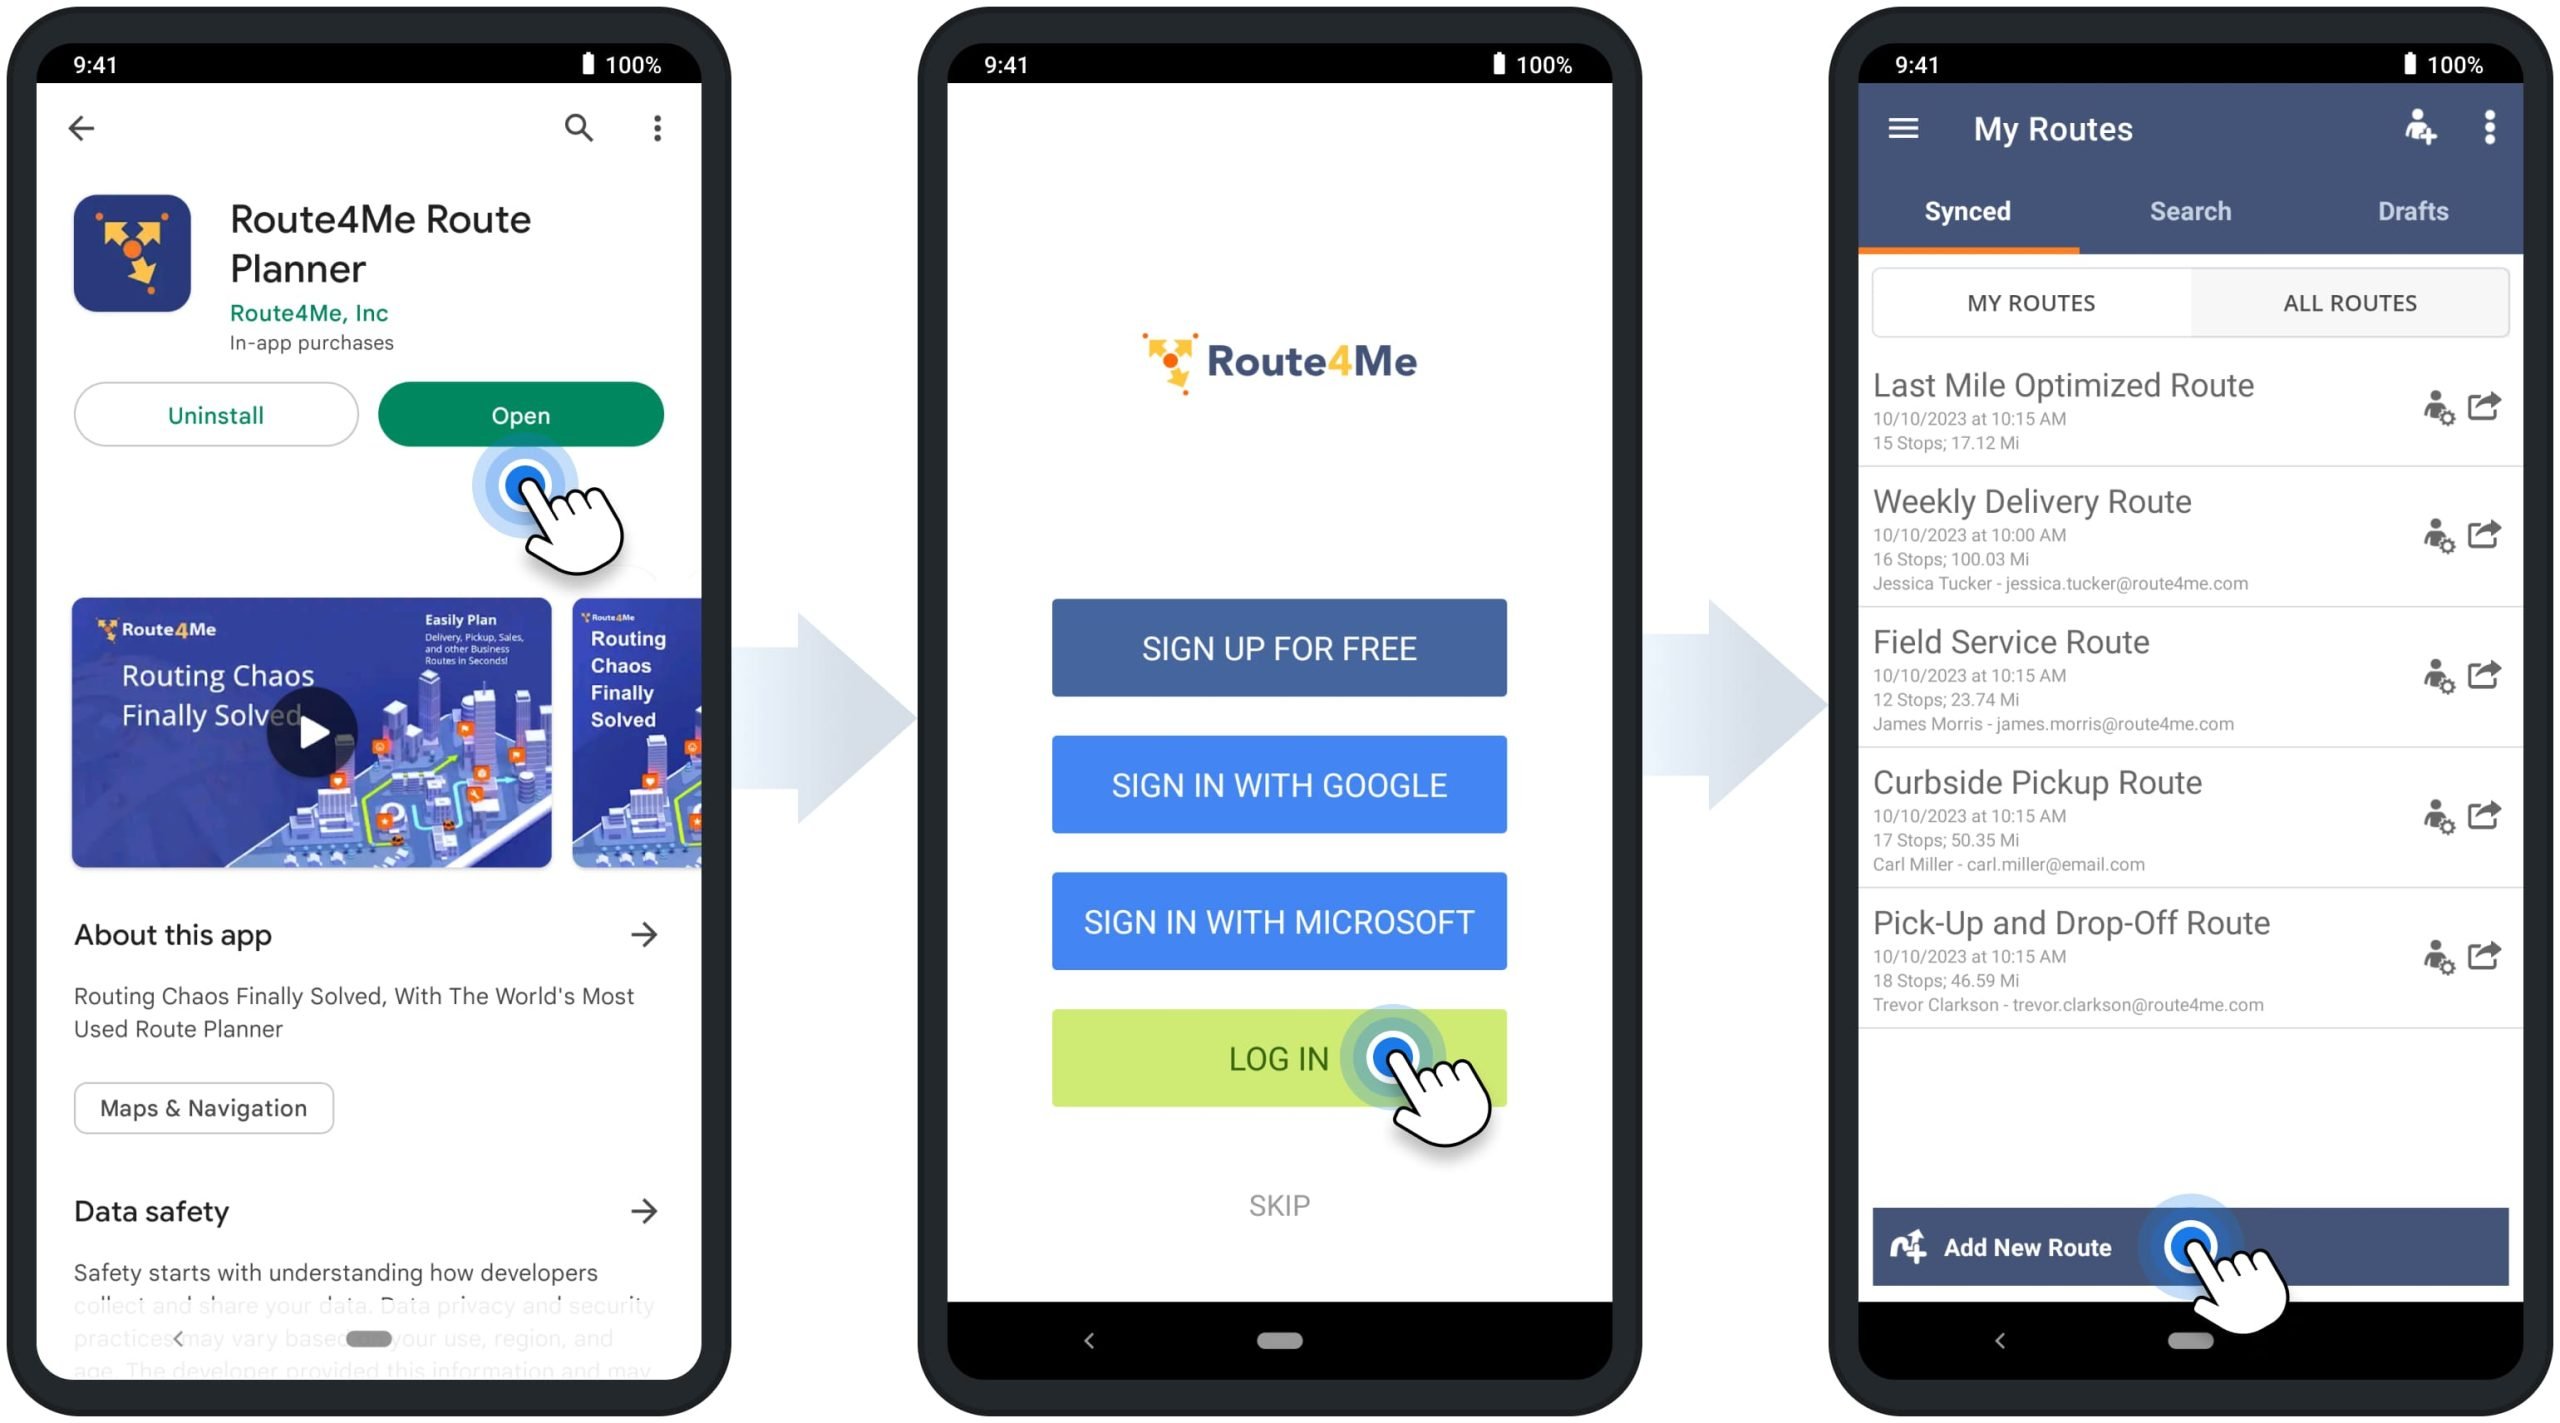 Restore Route4Me Mobile subscription for Route4Me's Android Route Planner app on a smartphone or tablet.